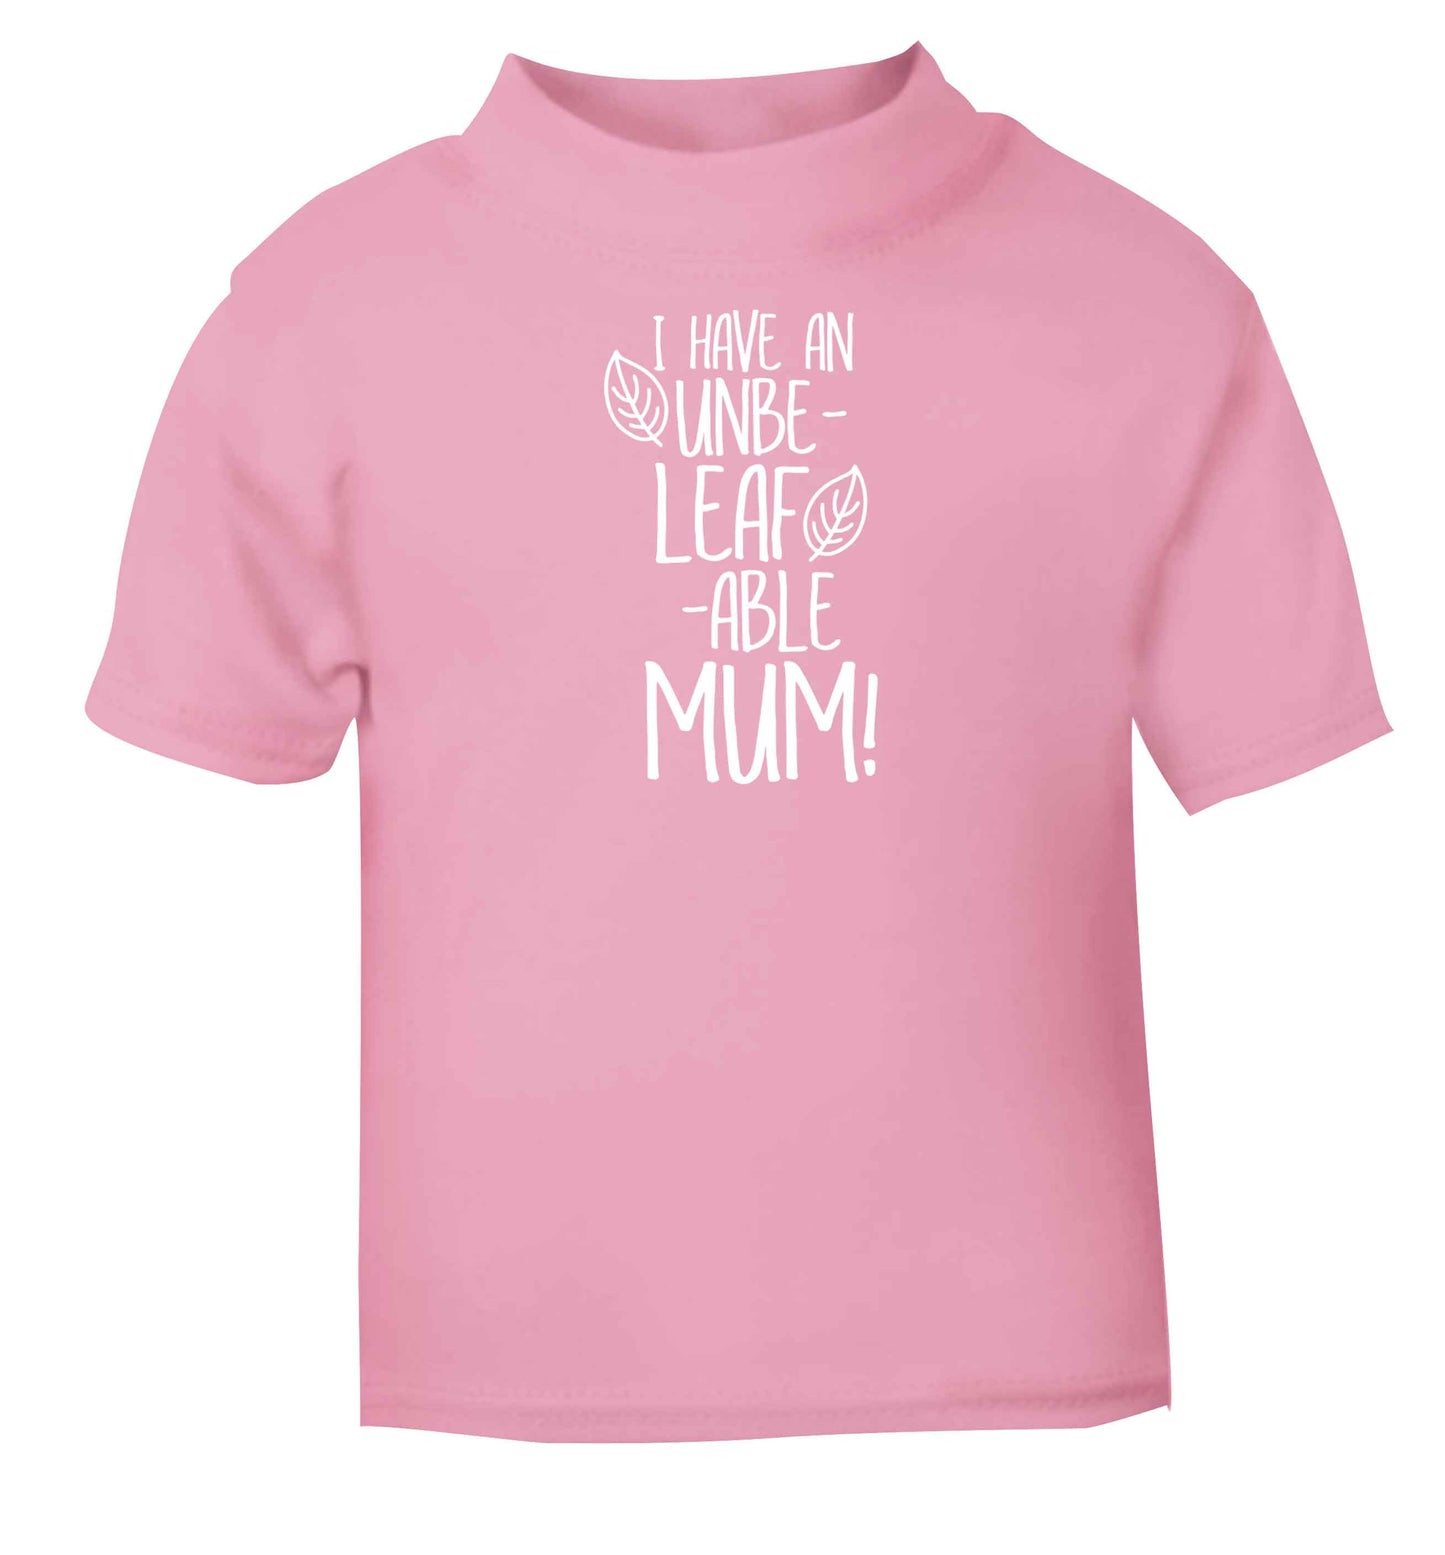 I have an unbeleafable mum! Children's light pink Tshirt 12-13 Years